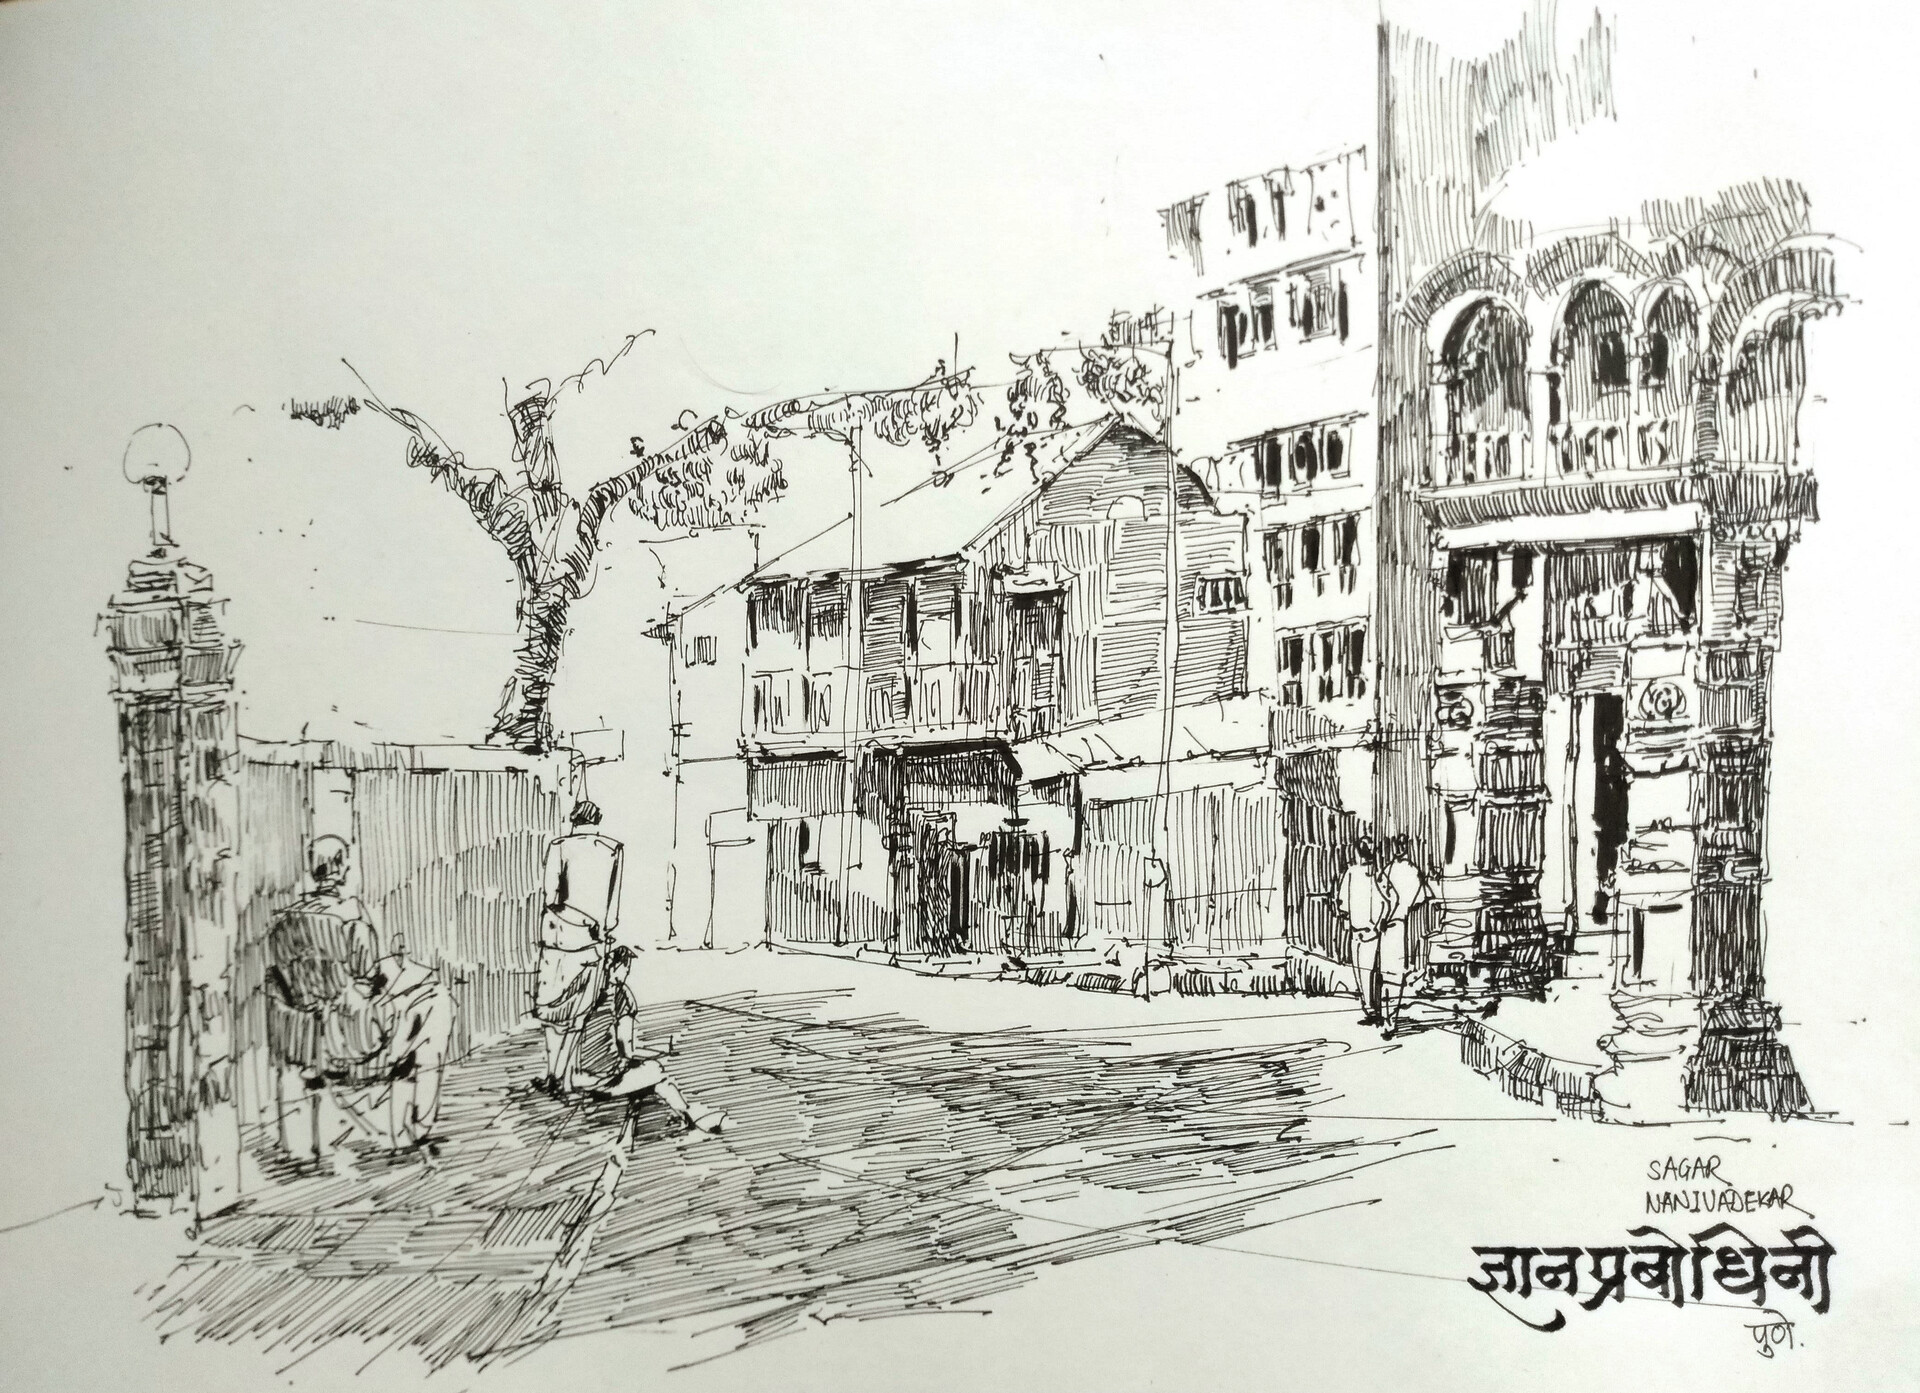 Urban Sketching Latest Articles Videos and Photos of Urban Sketching   Telegraph India